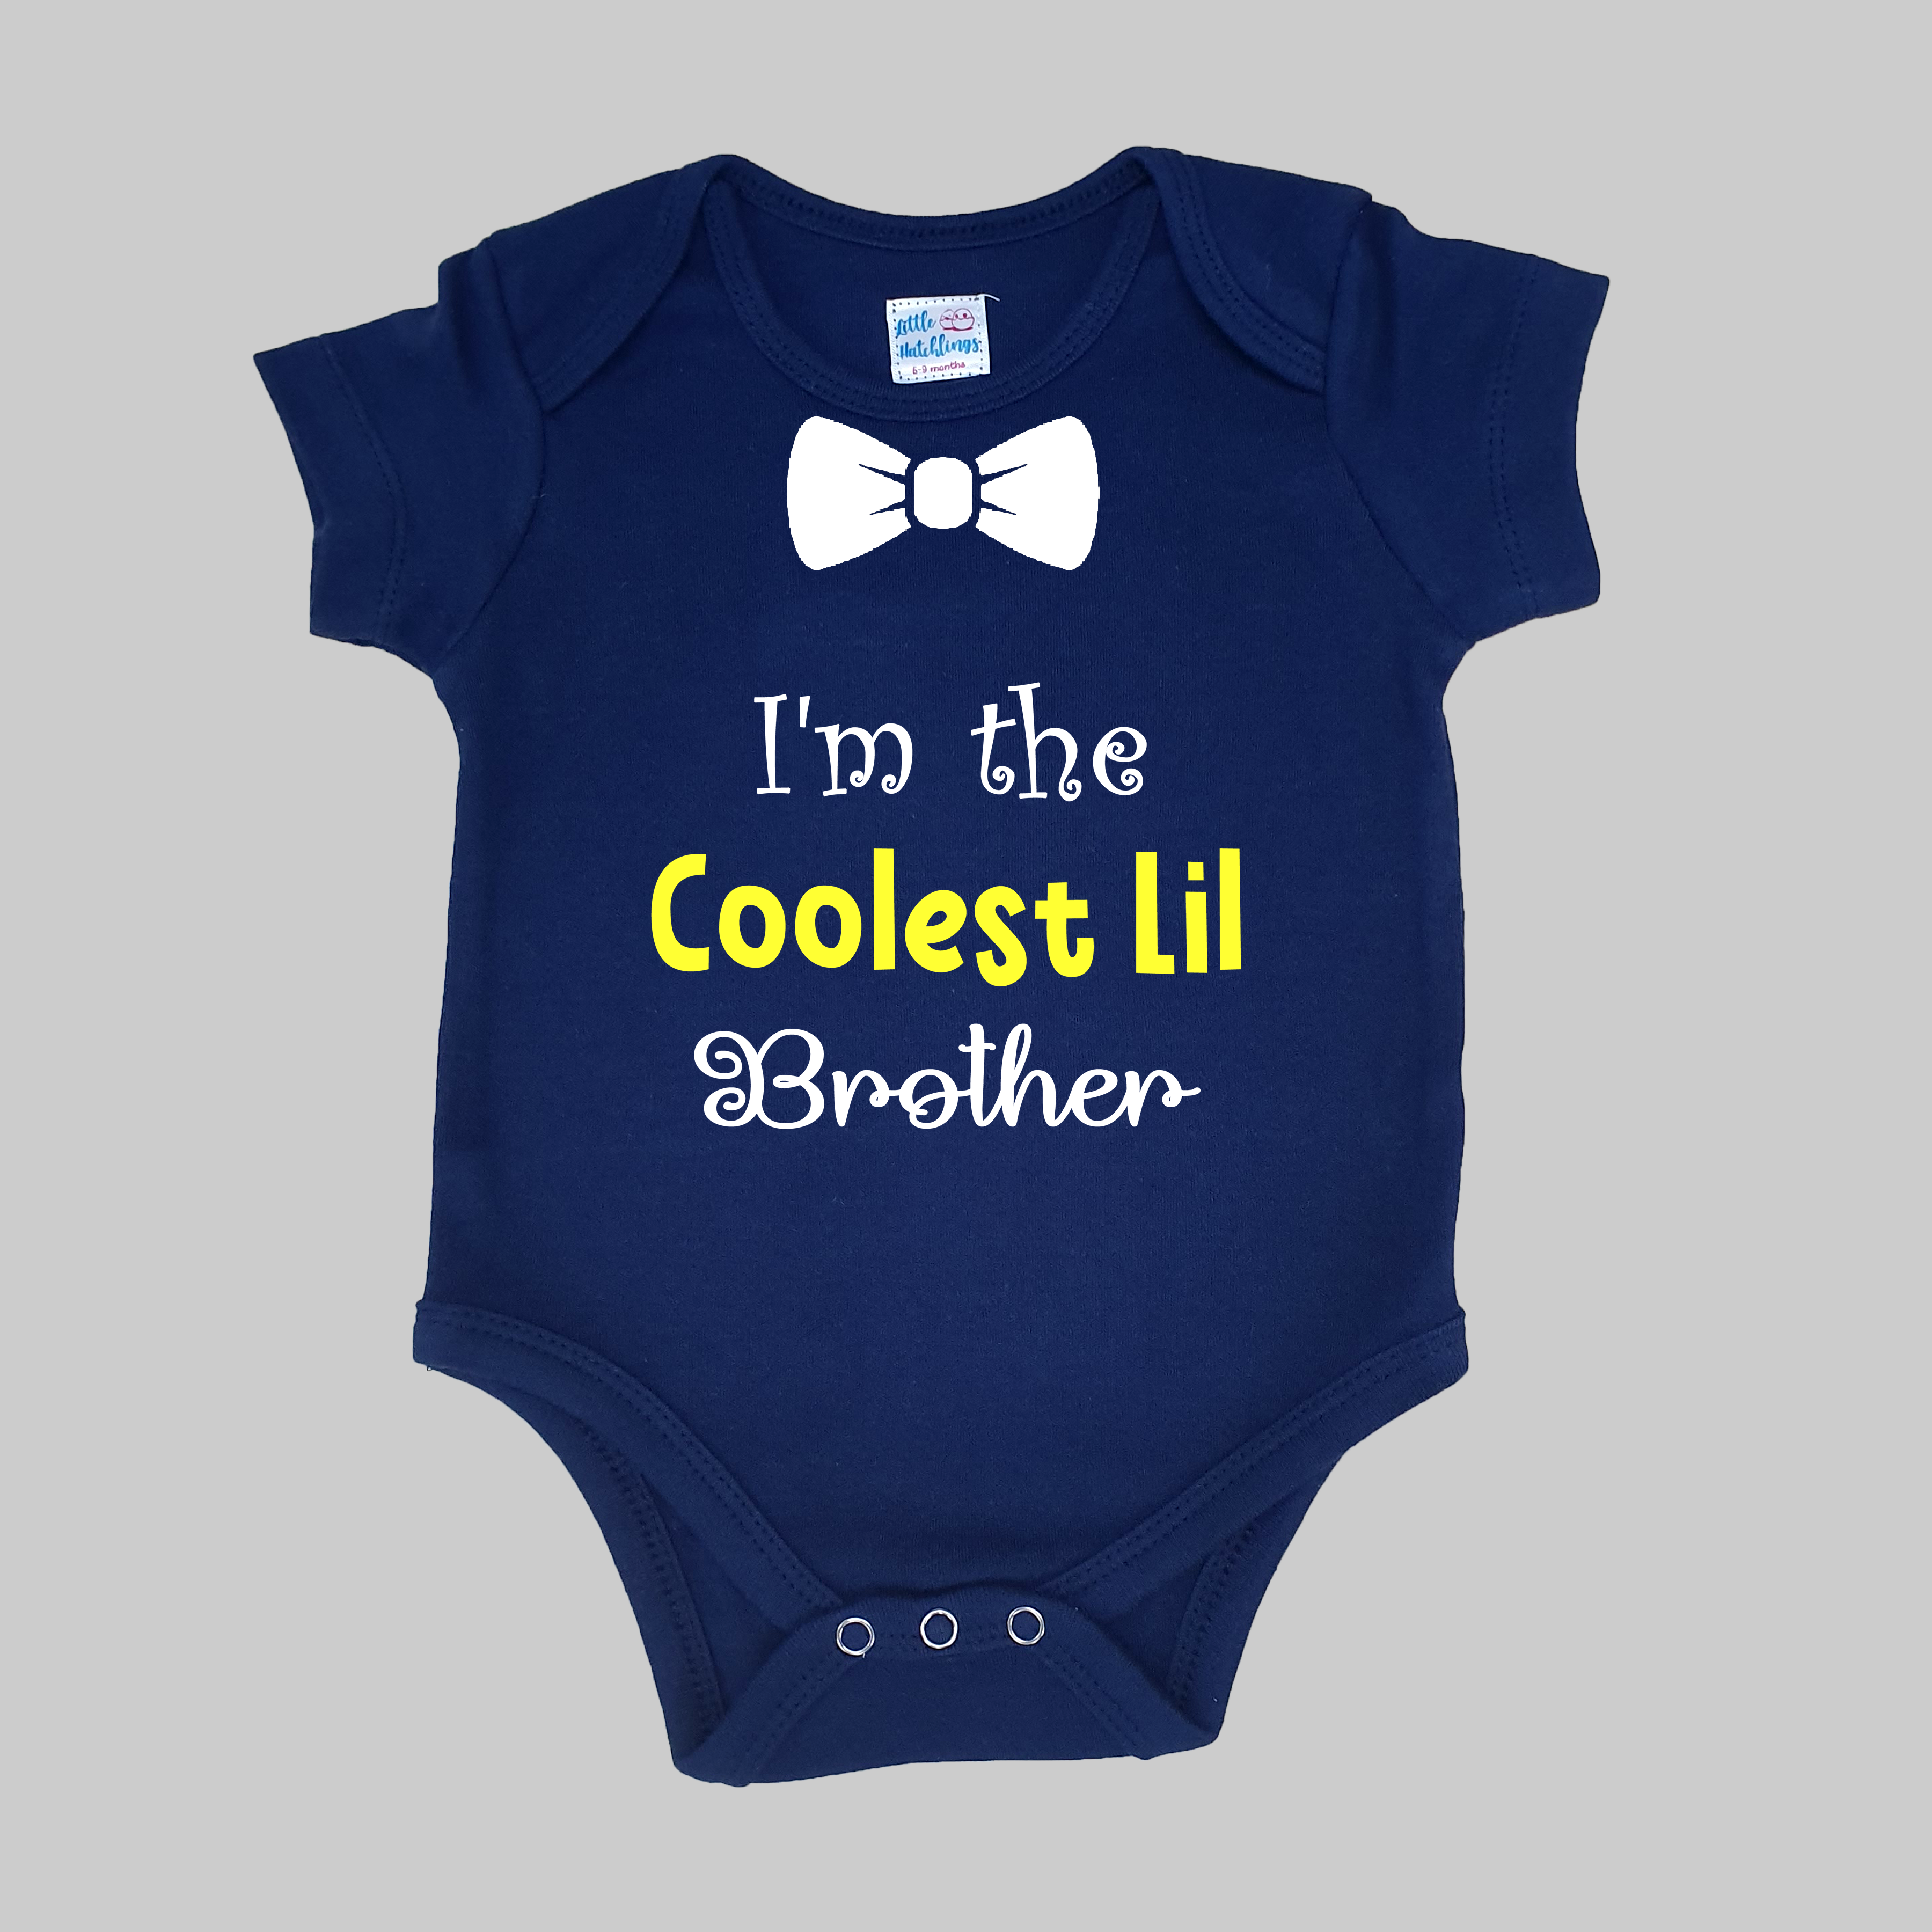 I'm The Coolest Lil Brother Navy Blue Onesie / Tshirt (Printed Bow)